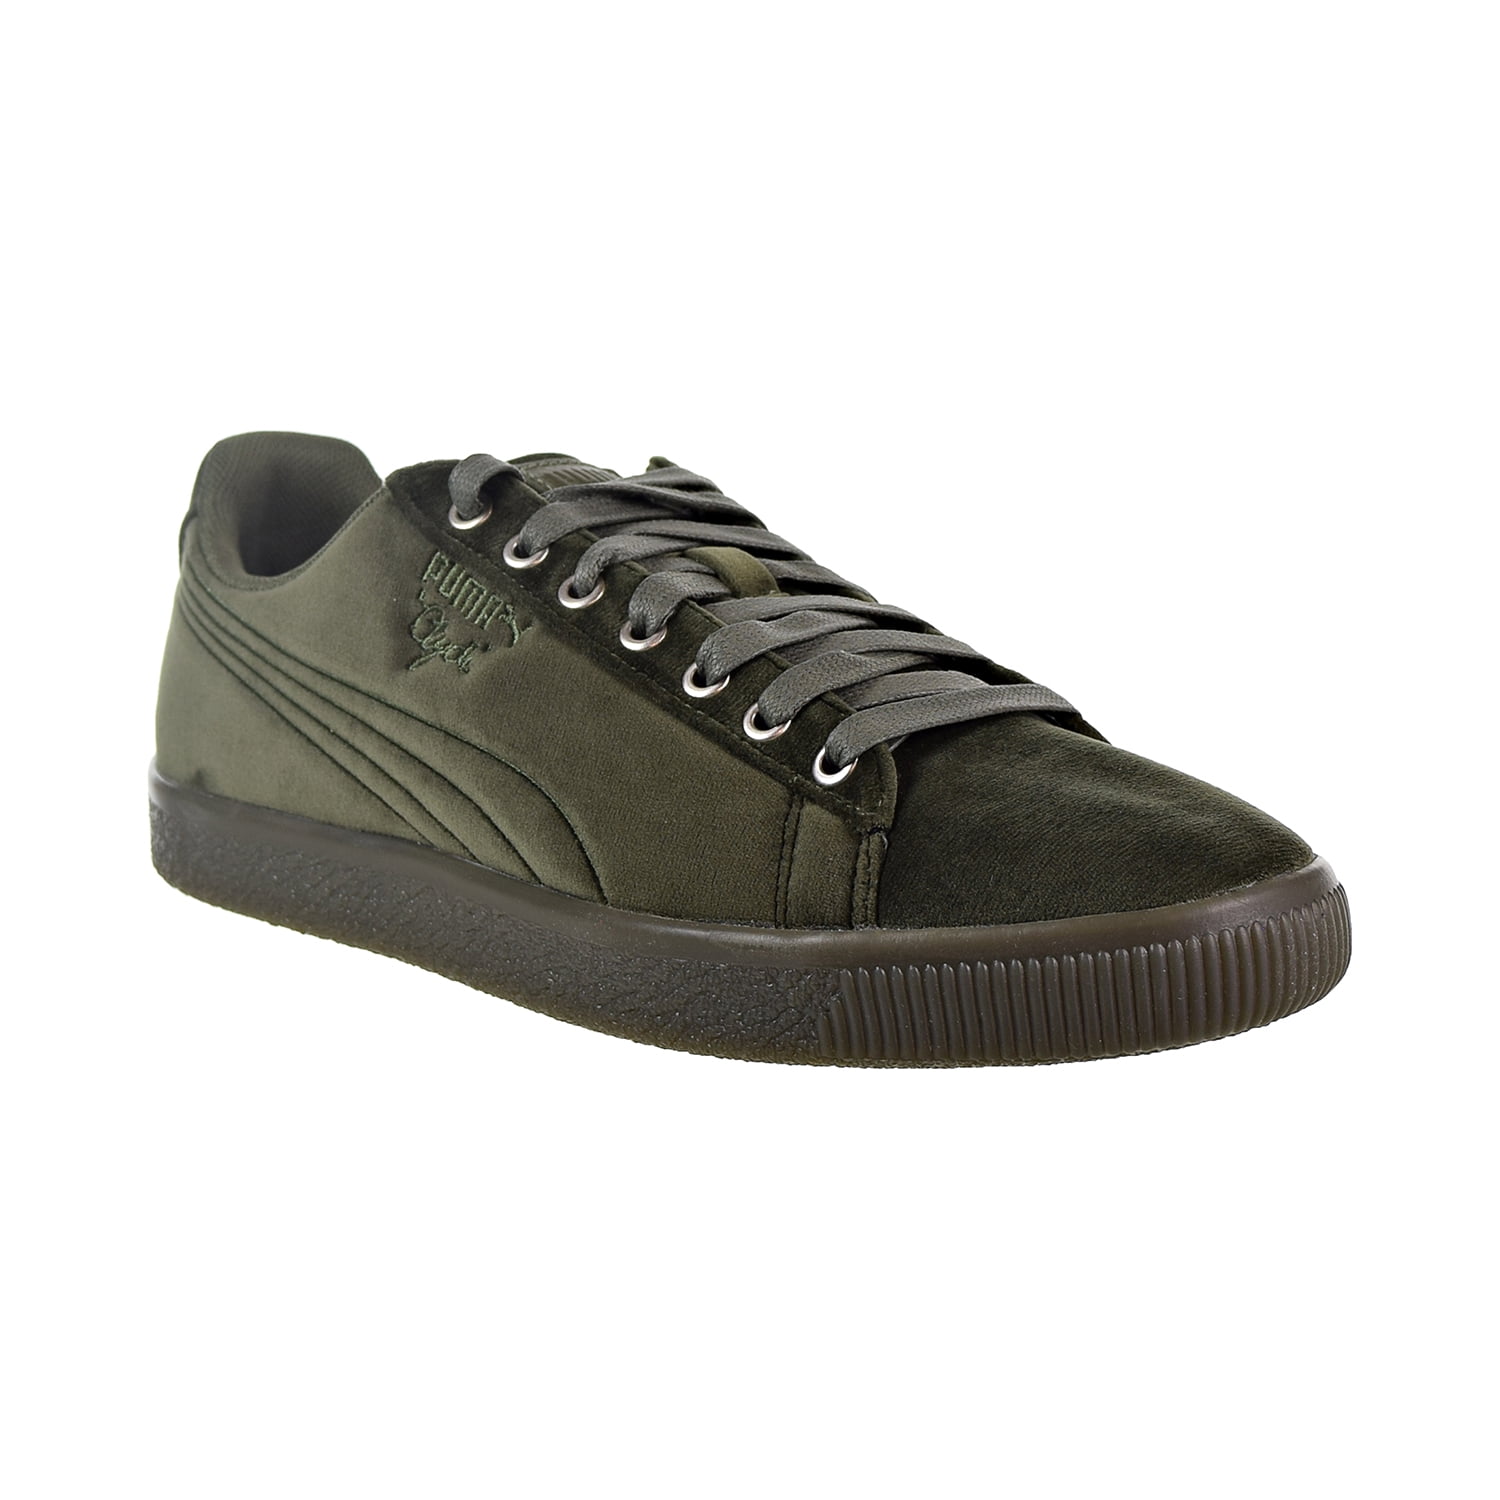 Puma clyde Velour Ice Men's Shoes Olive 